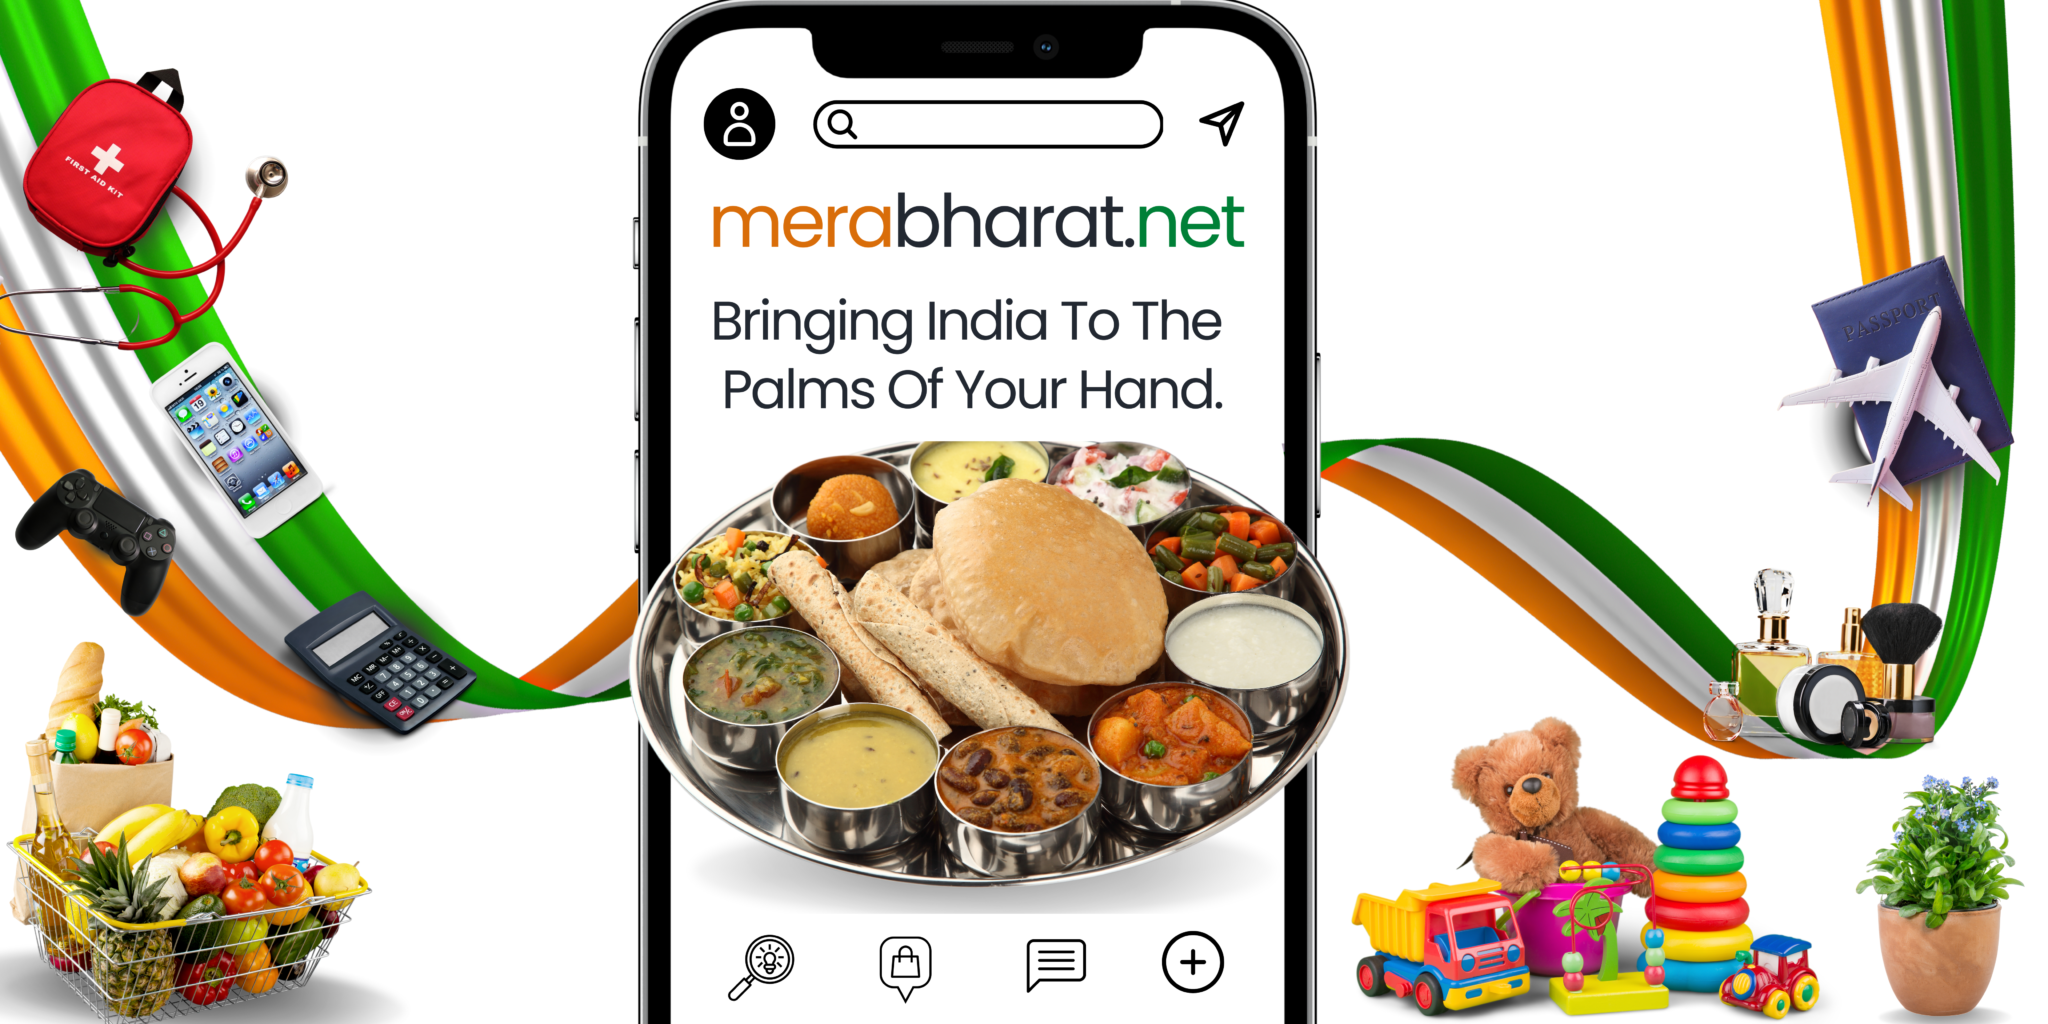 Step into Tomorrow: Merabharat.net as India’s Gateway to a Digital Utopia and Enhanced Living Experience